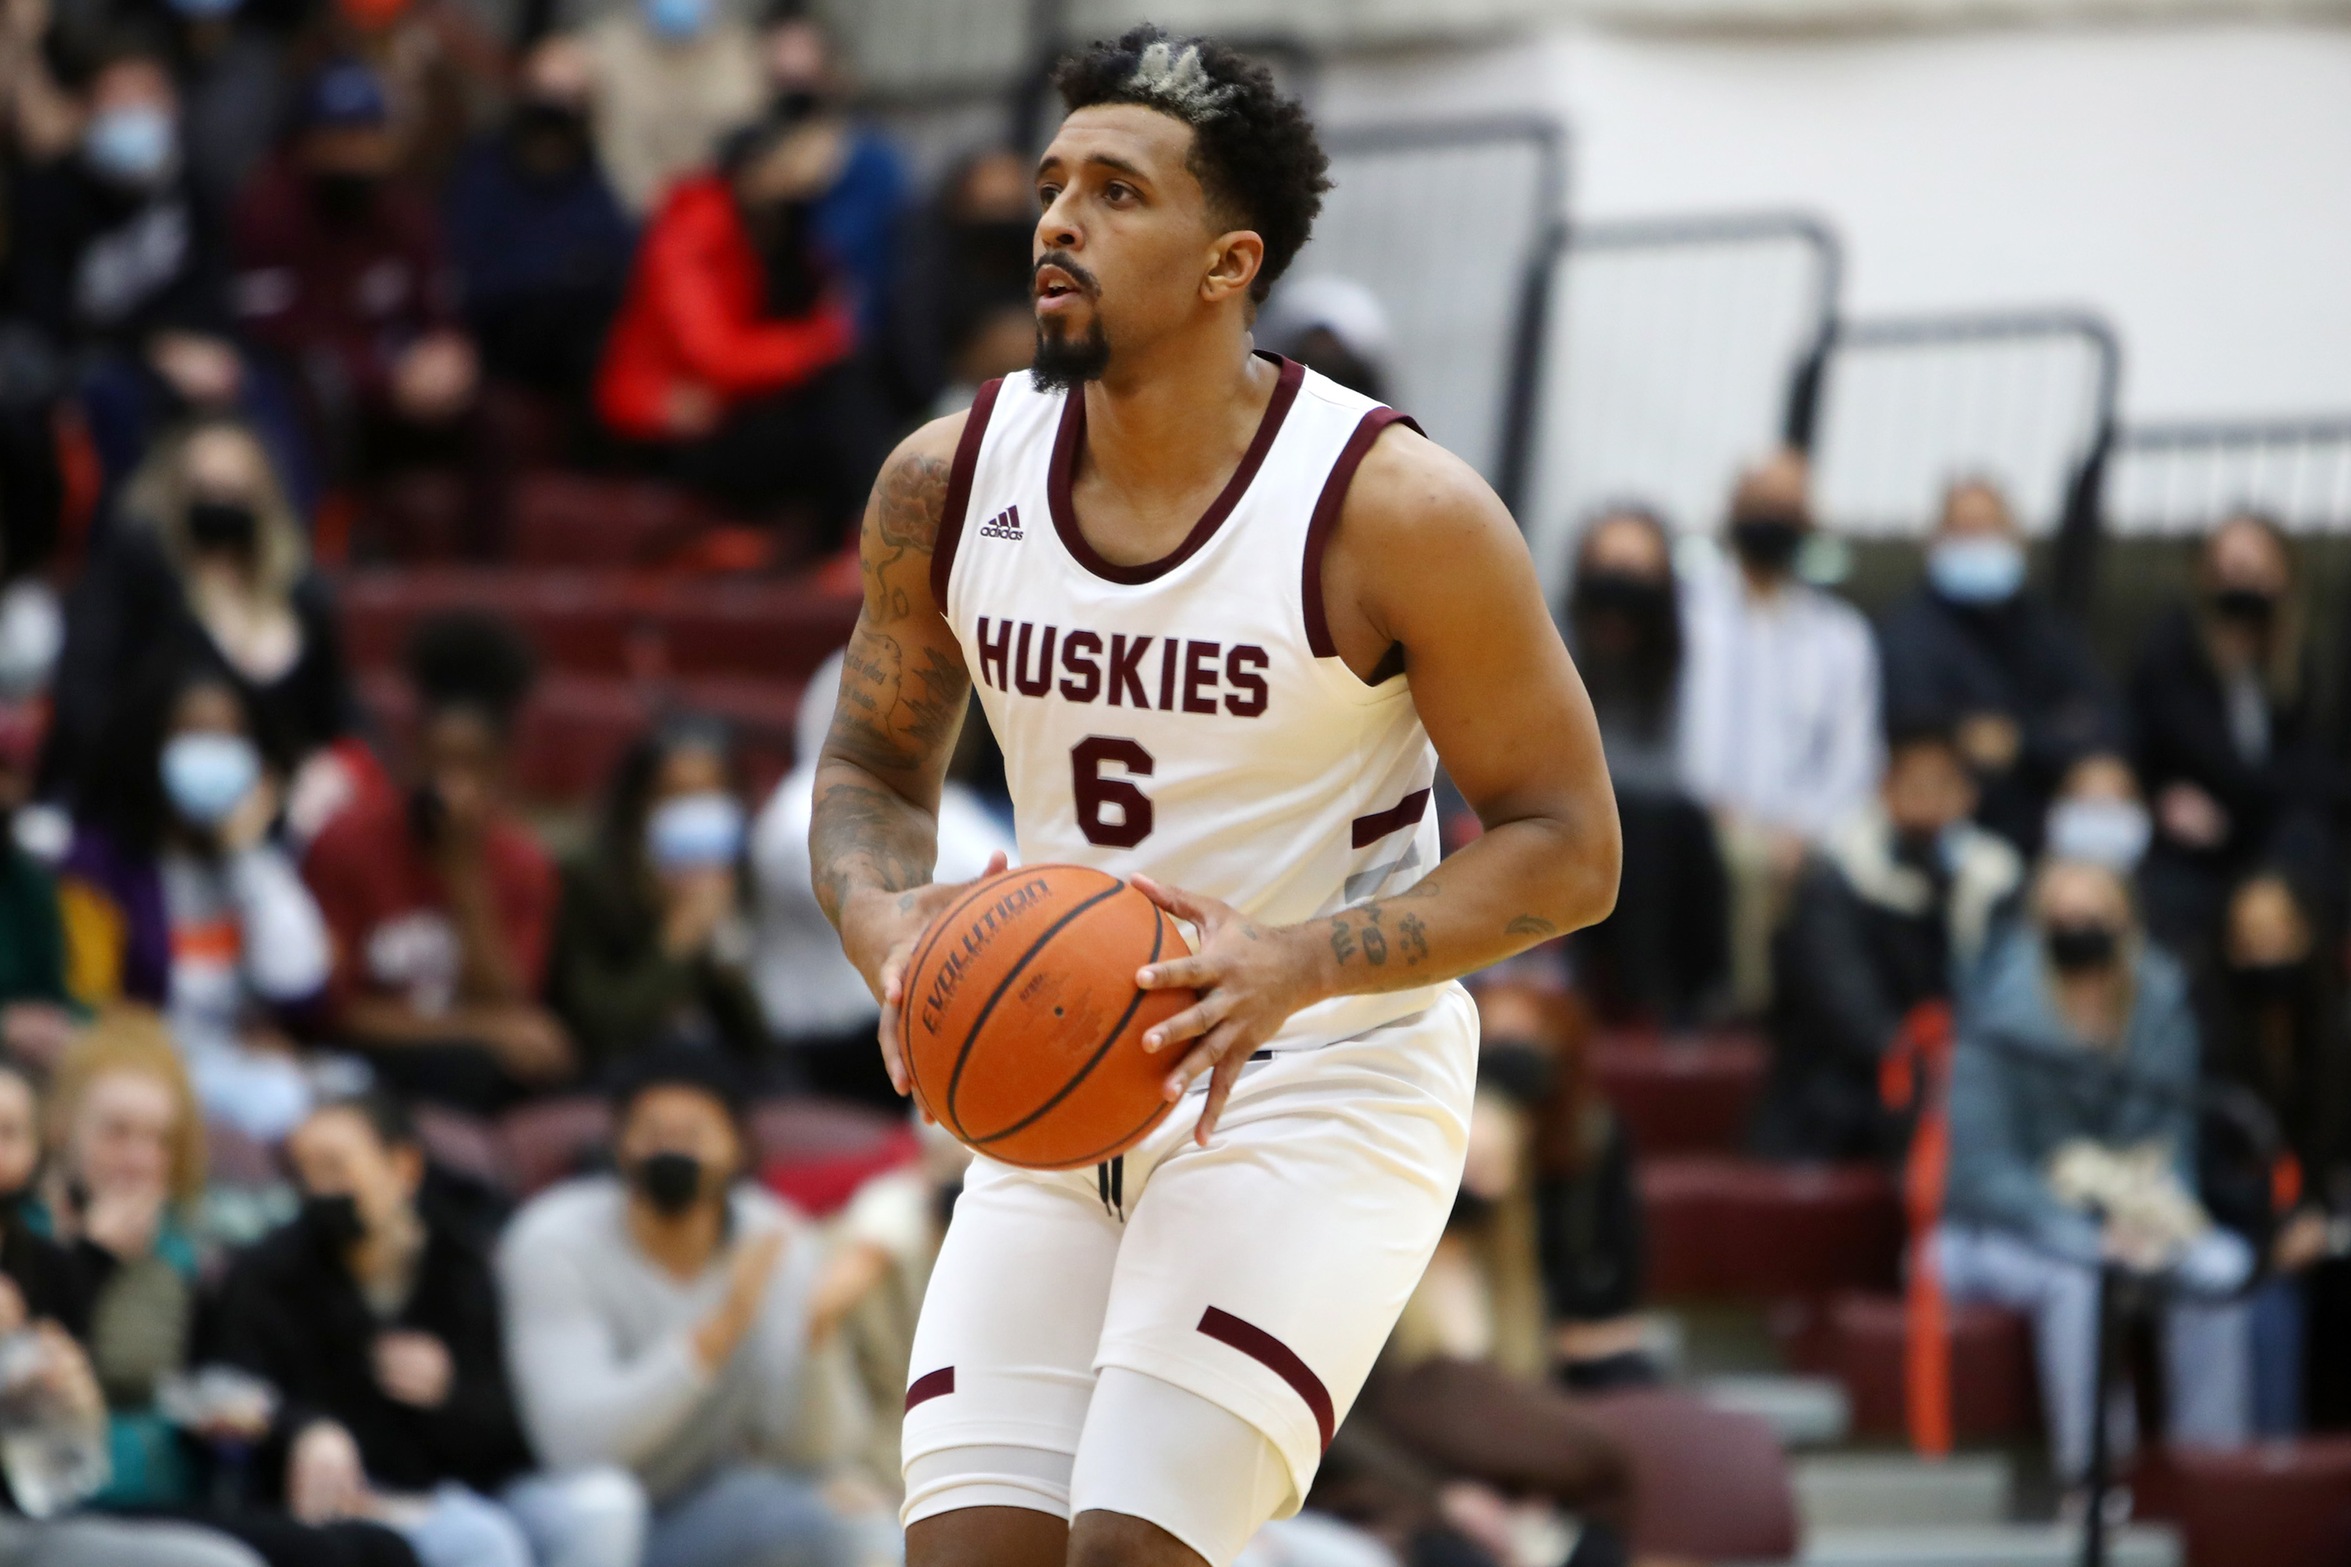 Nikita Kasongo led the Huskies with 21 points on his Senior Night, as Saint Mary's held on for a 91-88 win over the Memorial Sea-Hawks on March 5, 2022 at the Homburg Centre.